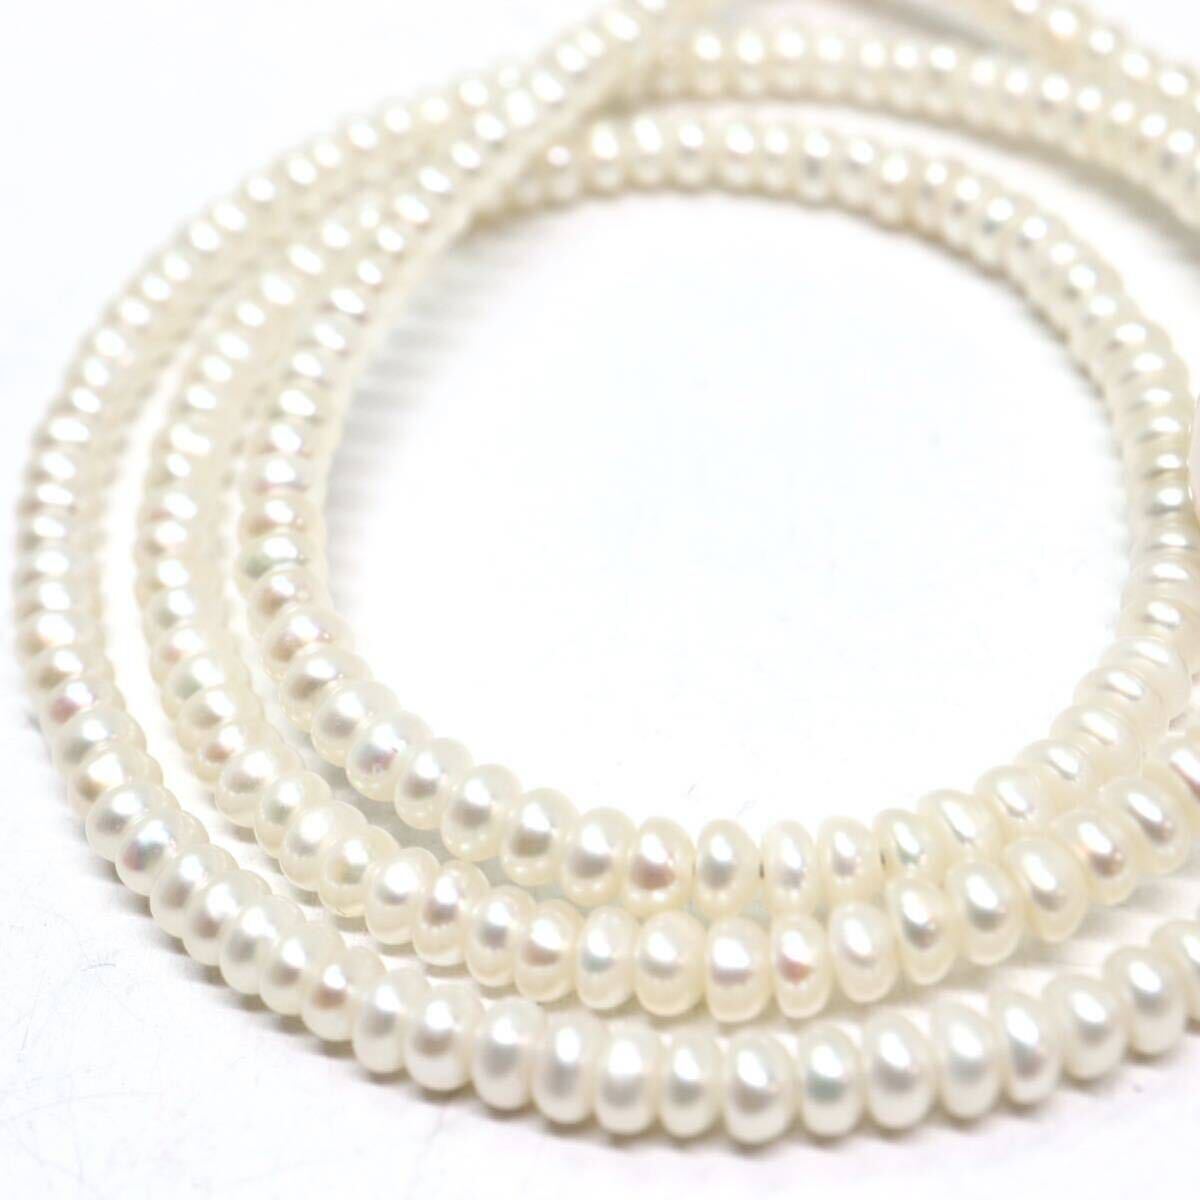 《K18 本真珠ネックレス》M 7.5g 約43cm pearl necklace ジュエリー jewelry DC0/DD0_画像5